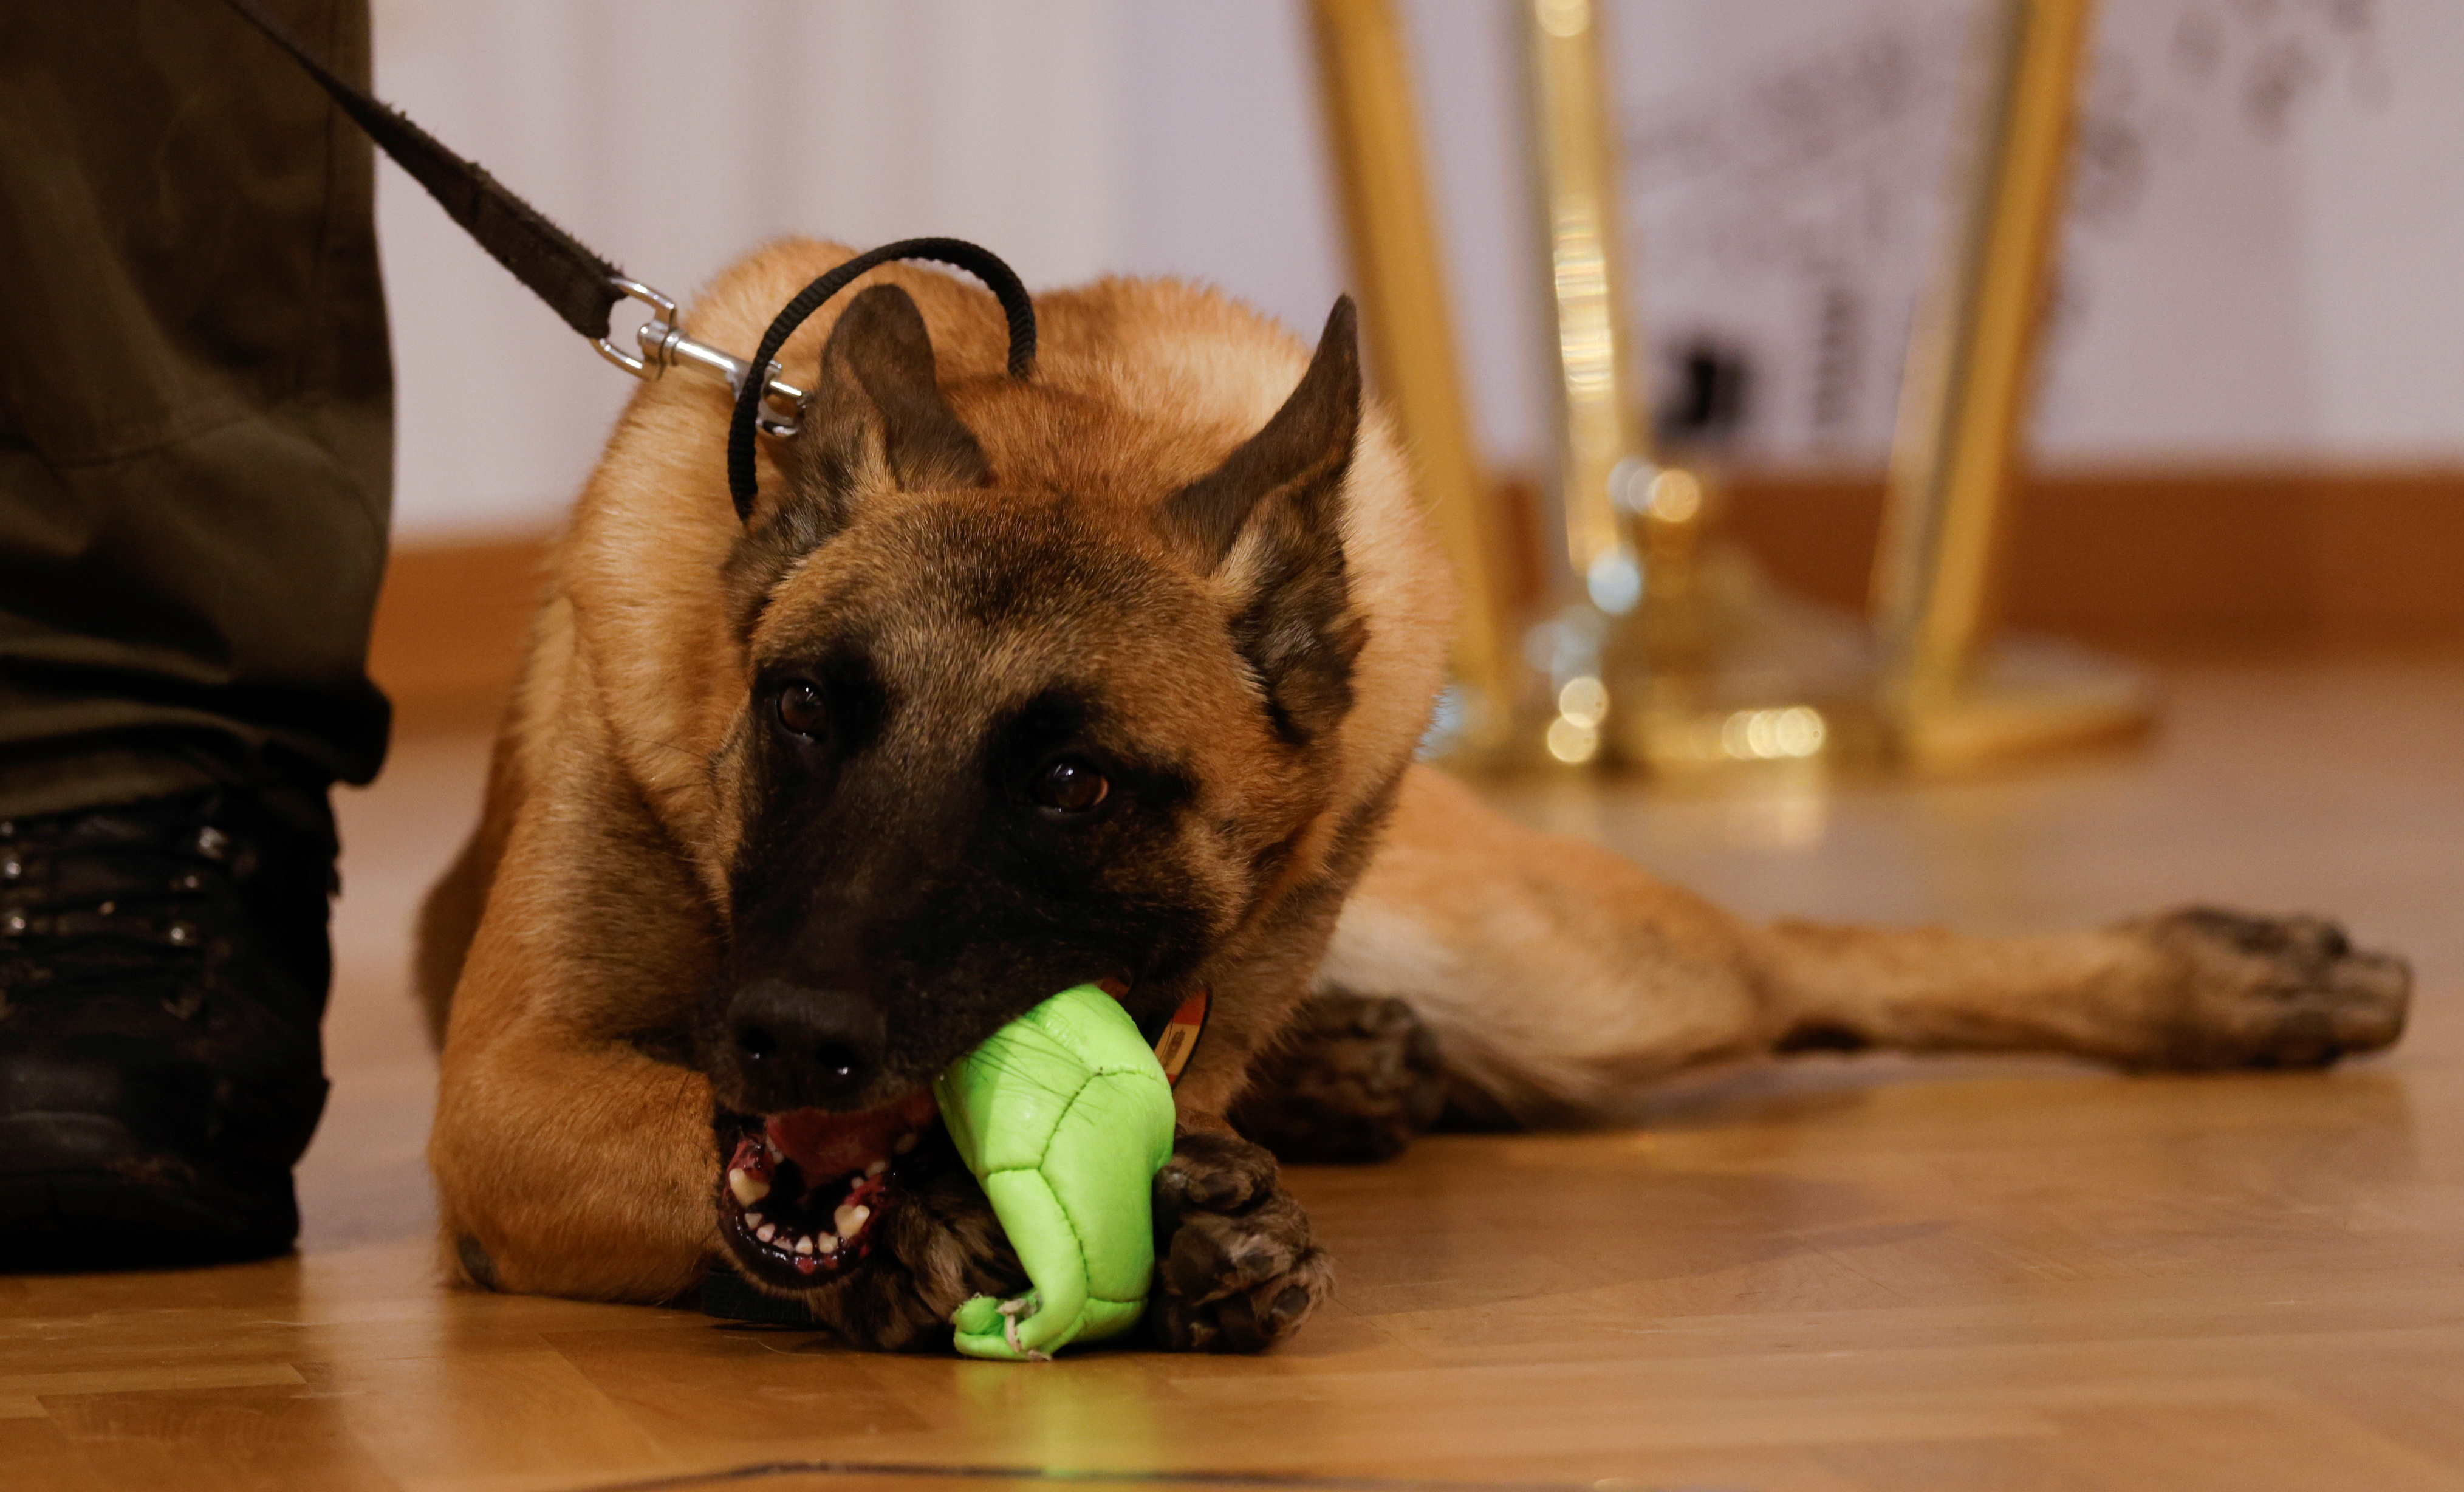 Austrian army reports on training dogs to detect COVID-19 in Vienna